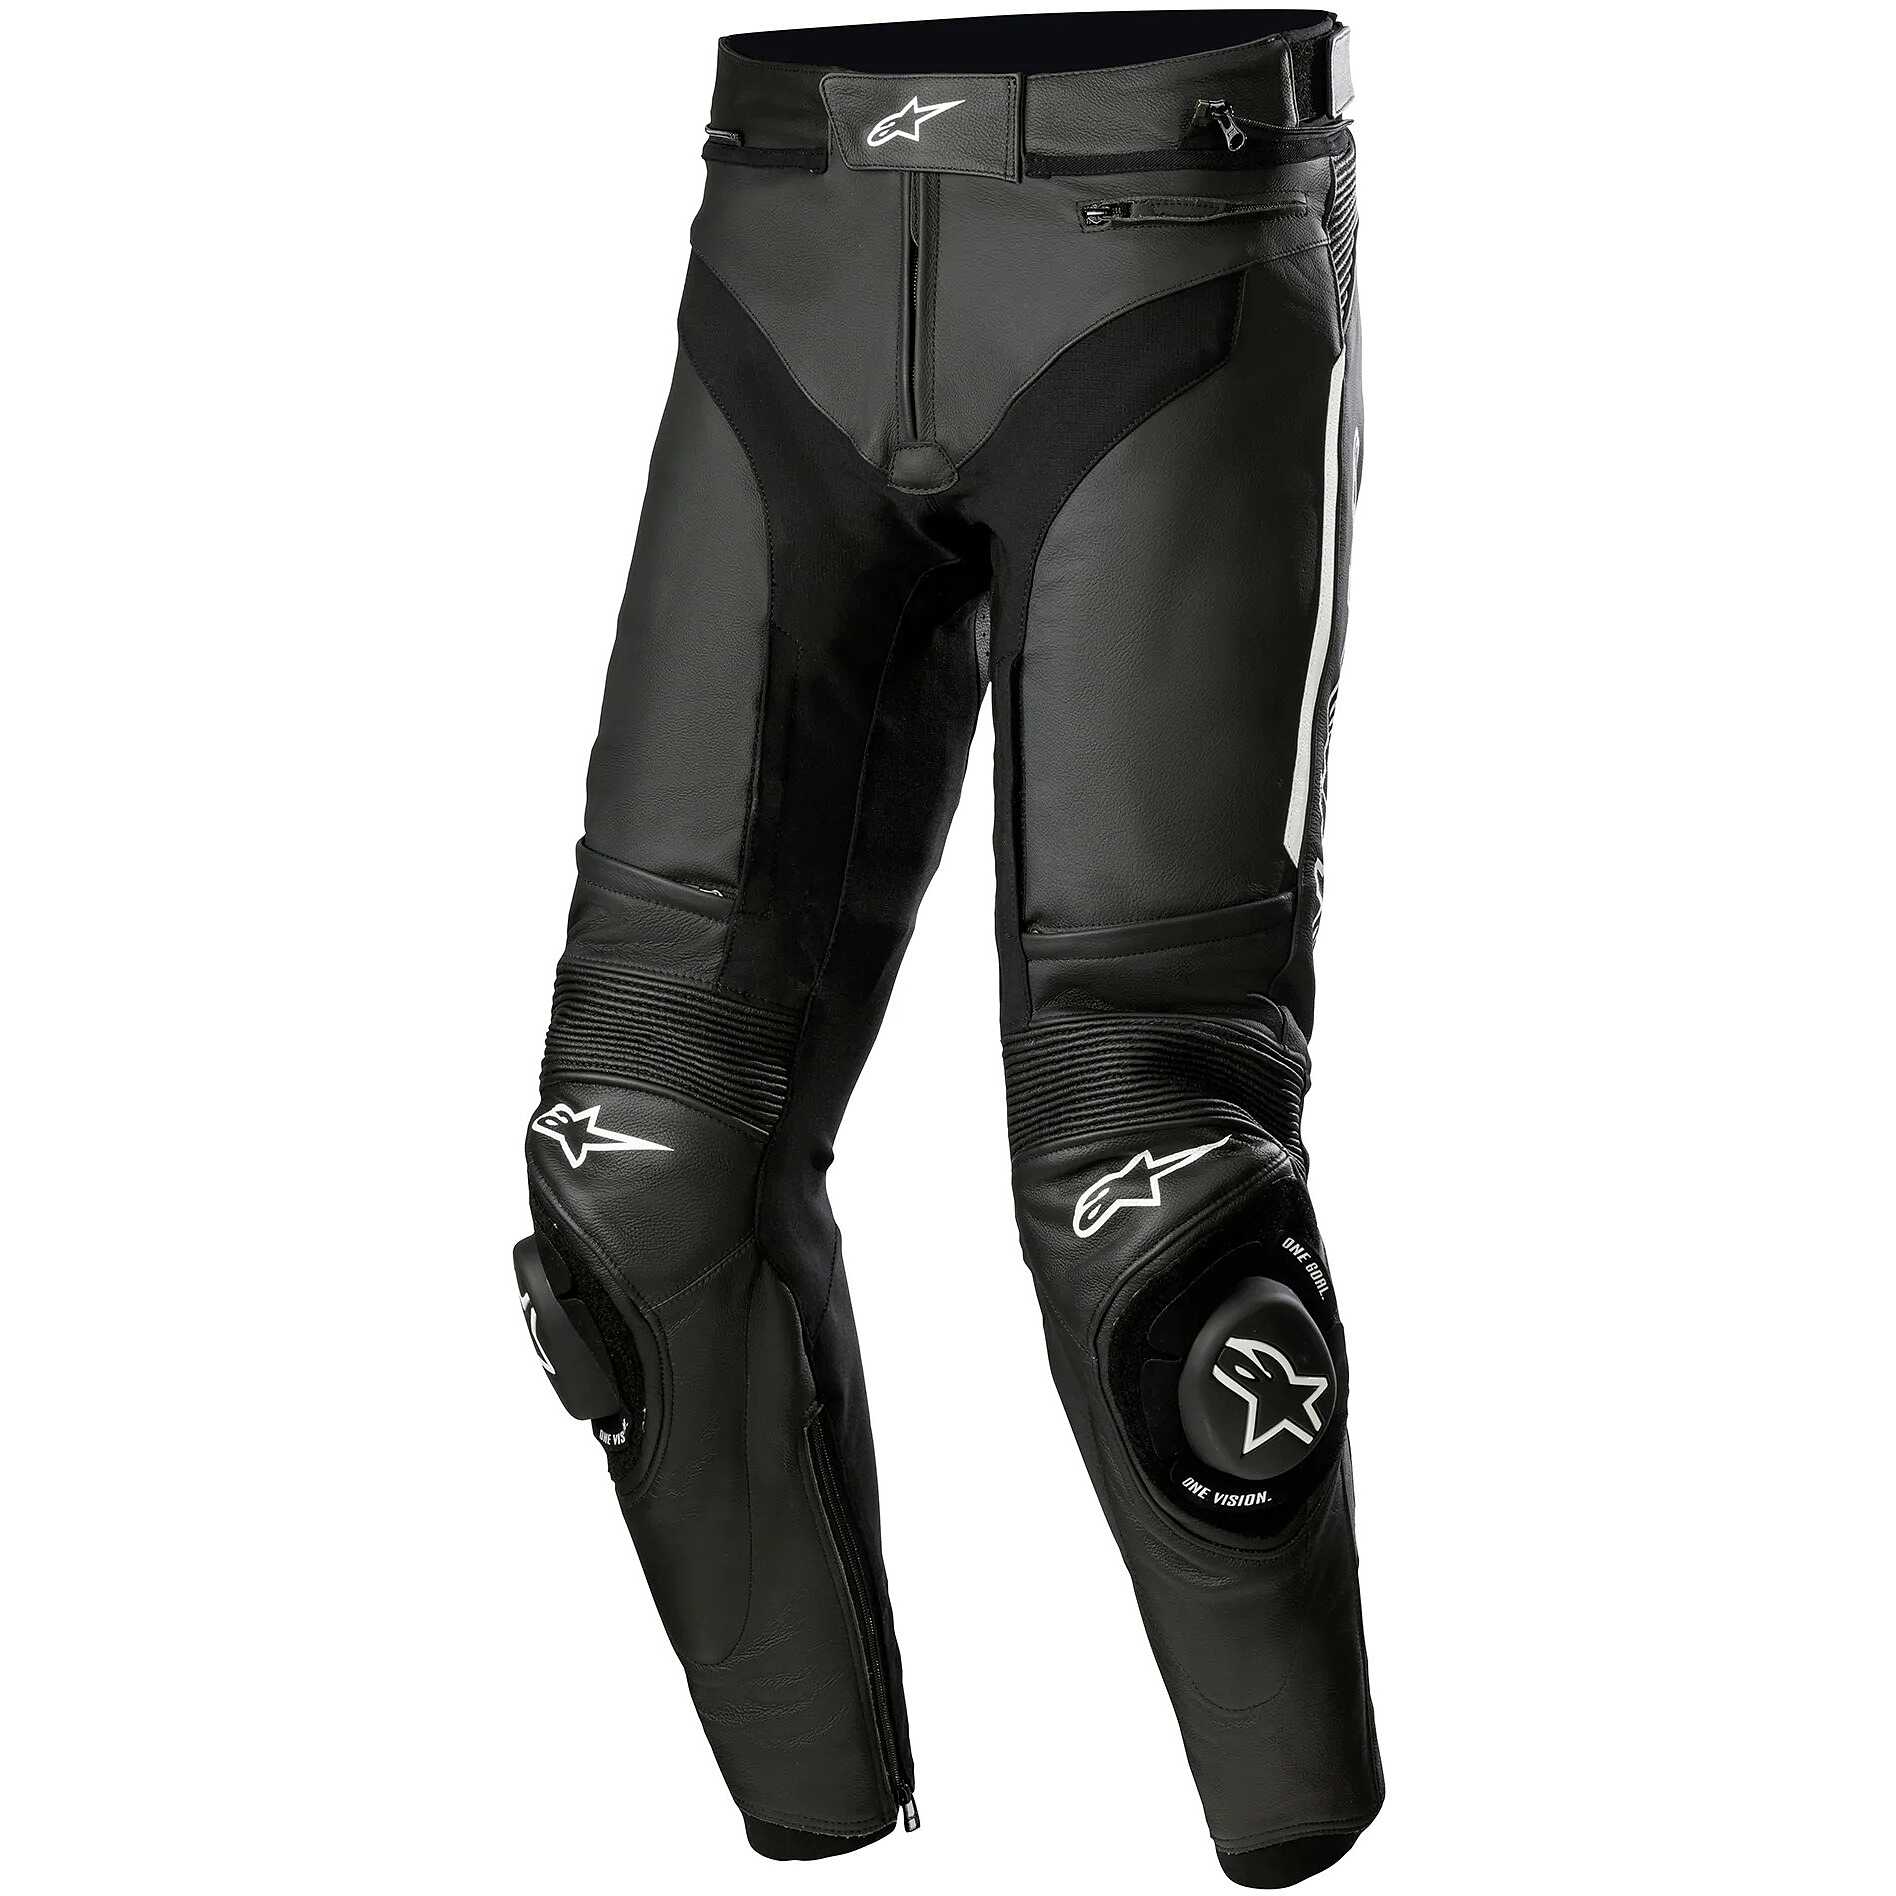 Leather Motorcycle Pants  Men Leather Motorcycle Pants  Motorcycle pants Leather  motorcycle pants Pants